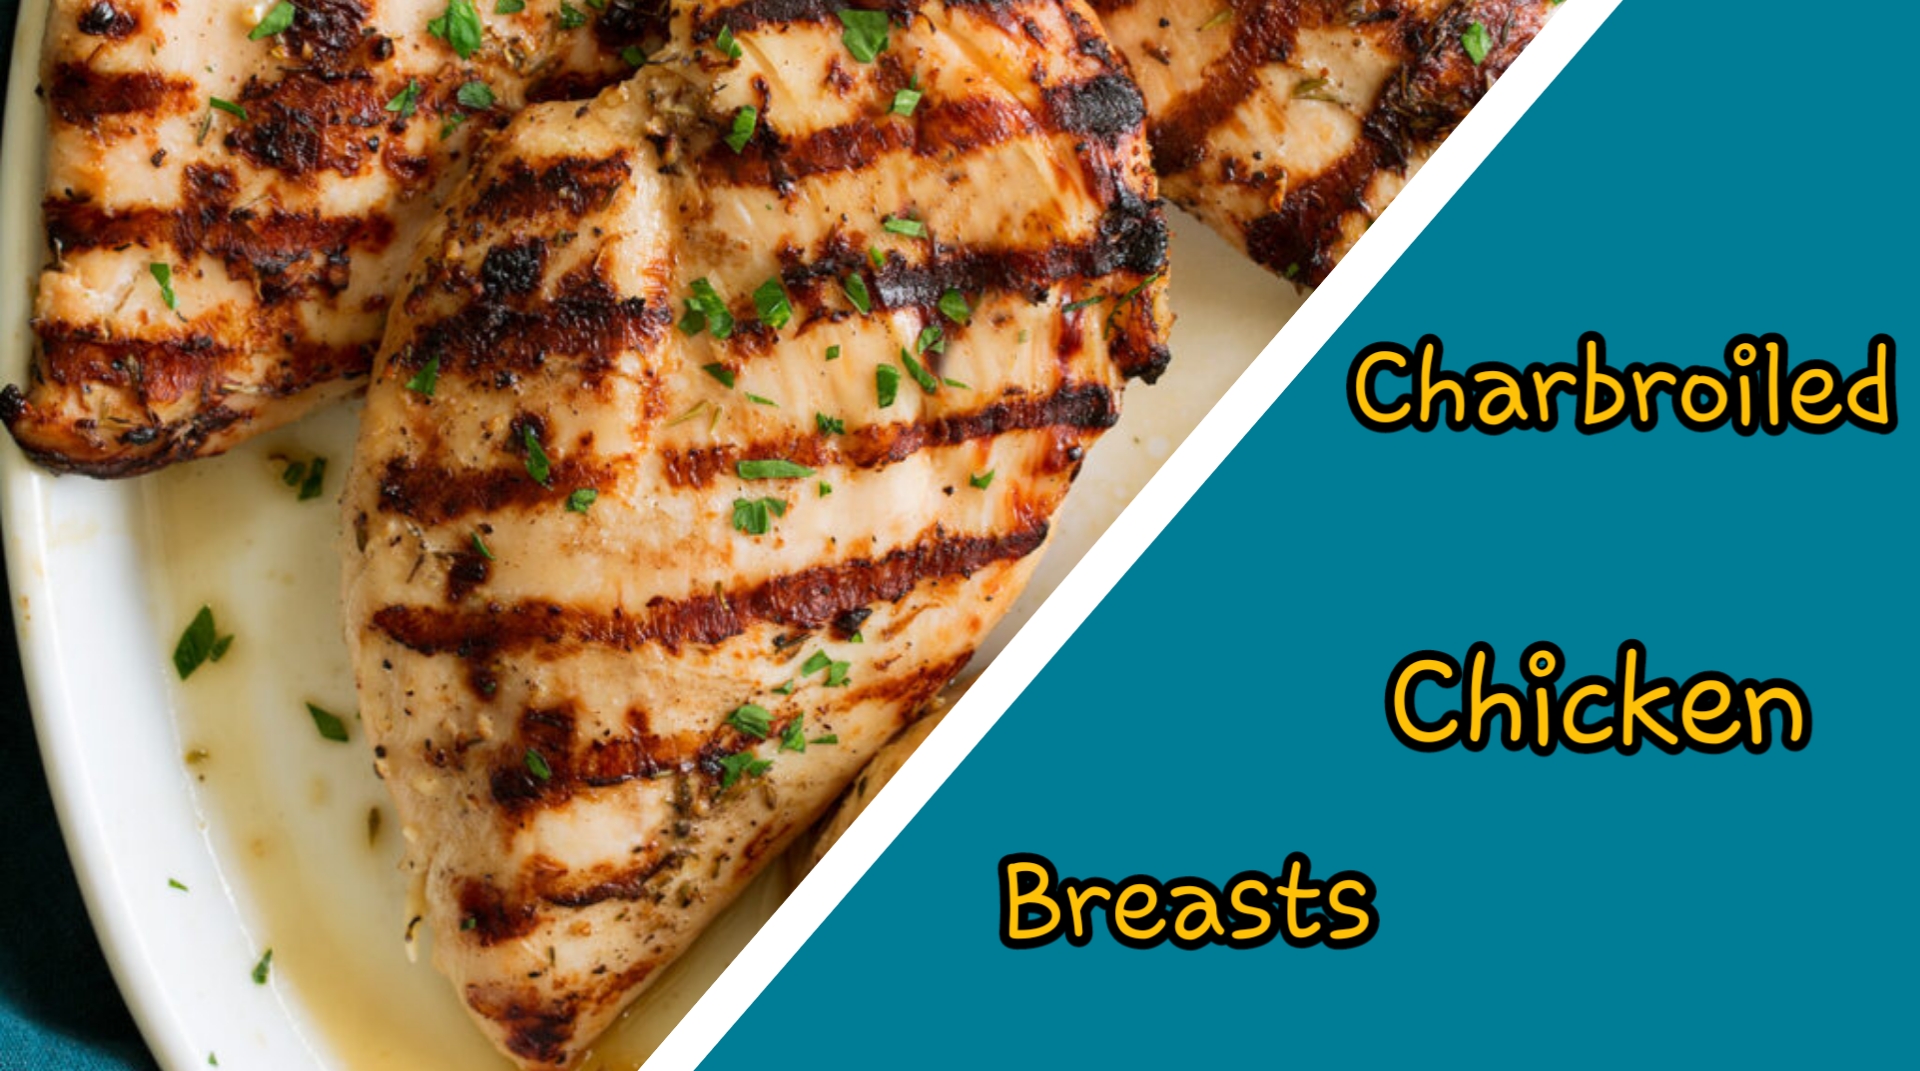 Charbroiled Chicken Breasts